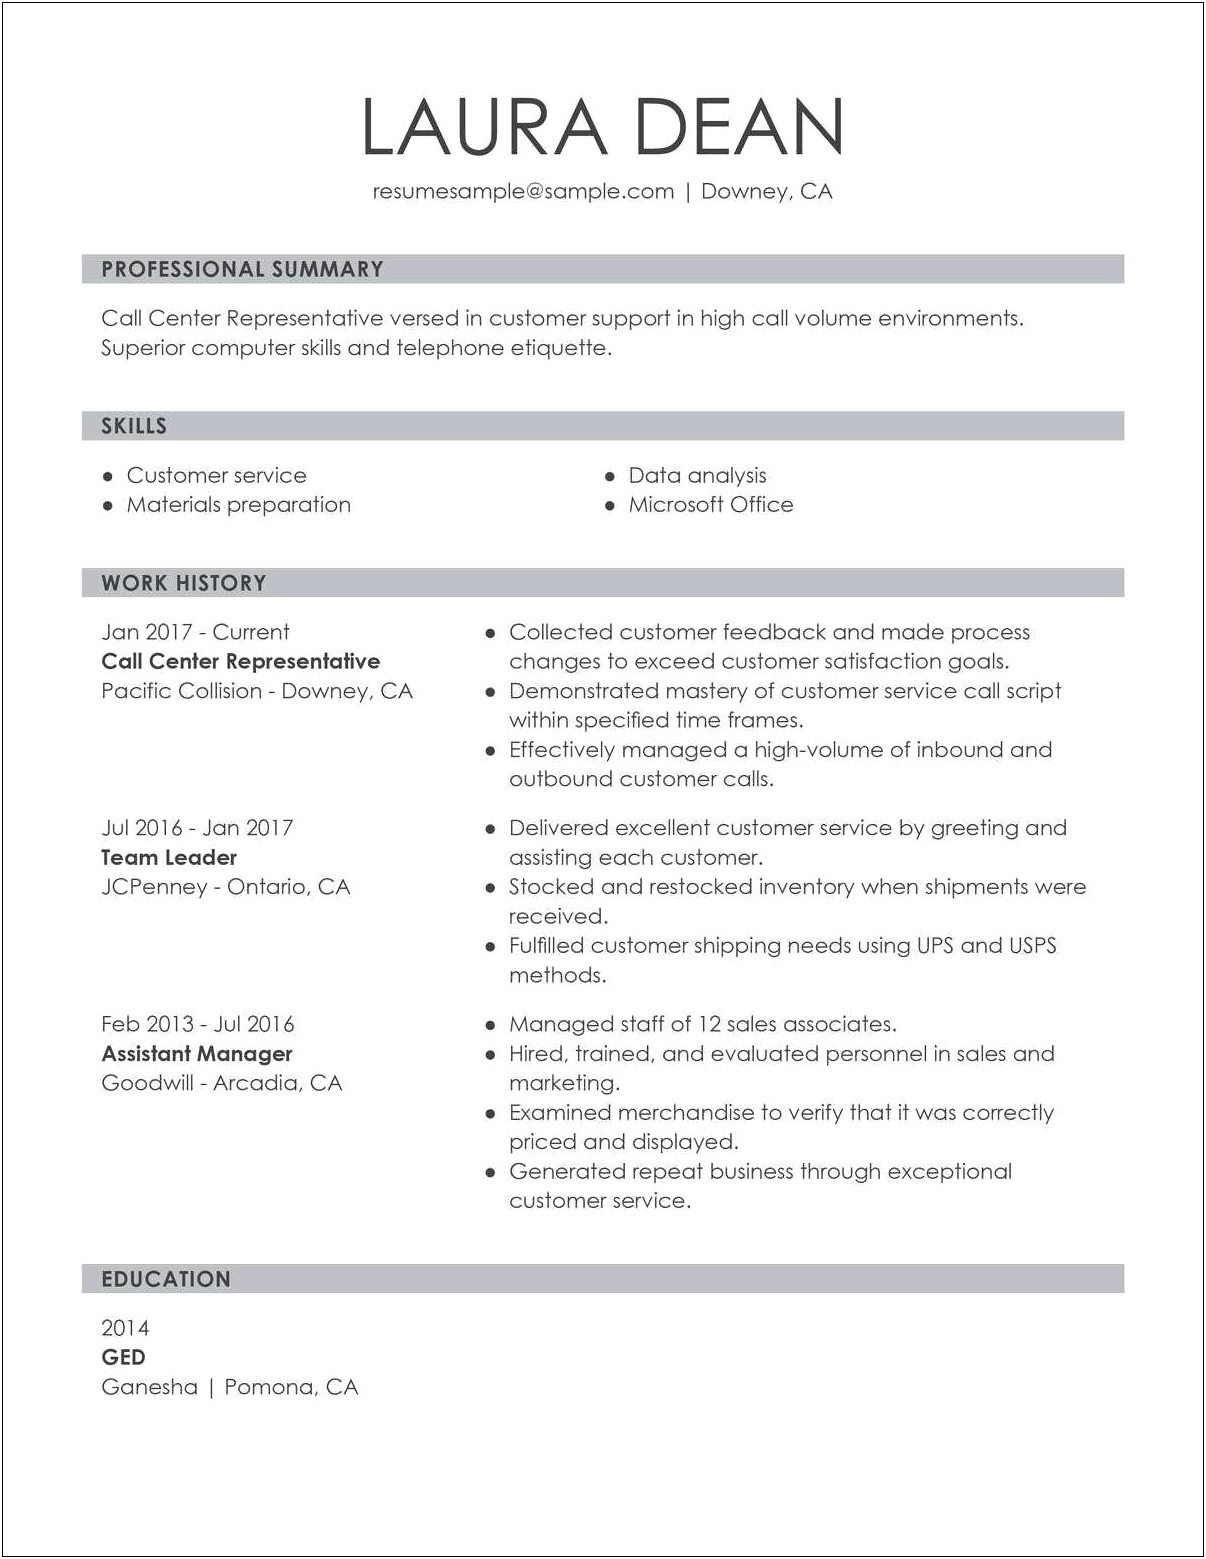 Basic Resume Examples For Customer Service